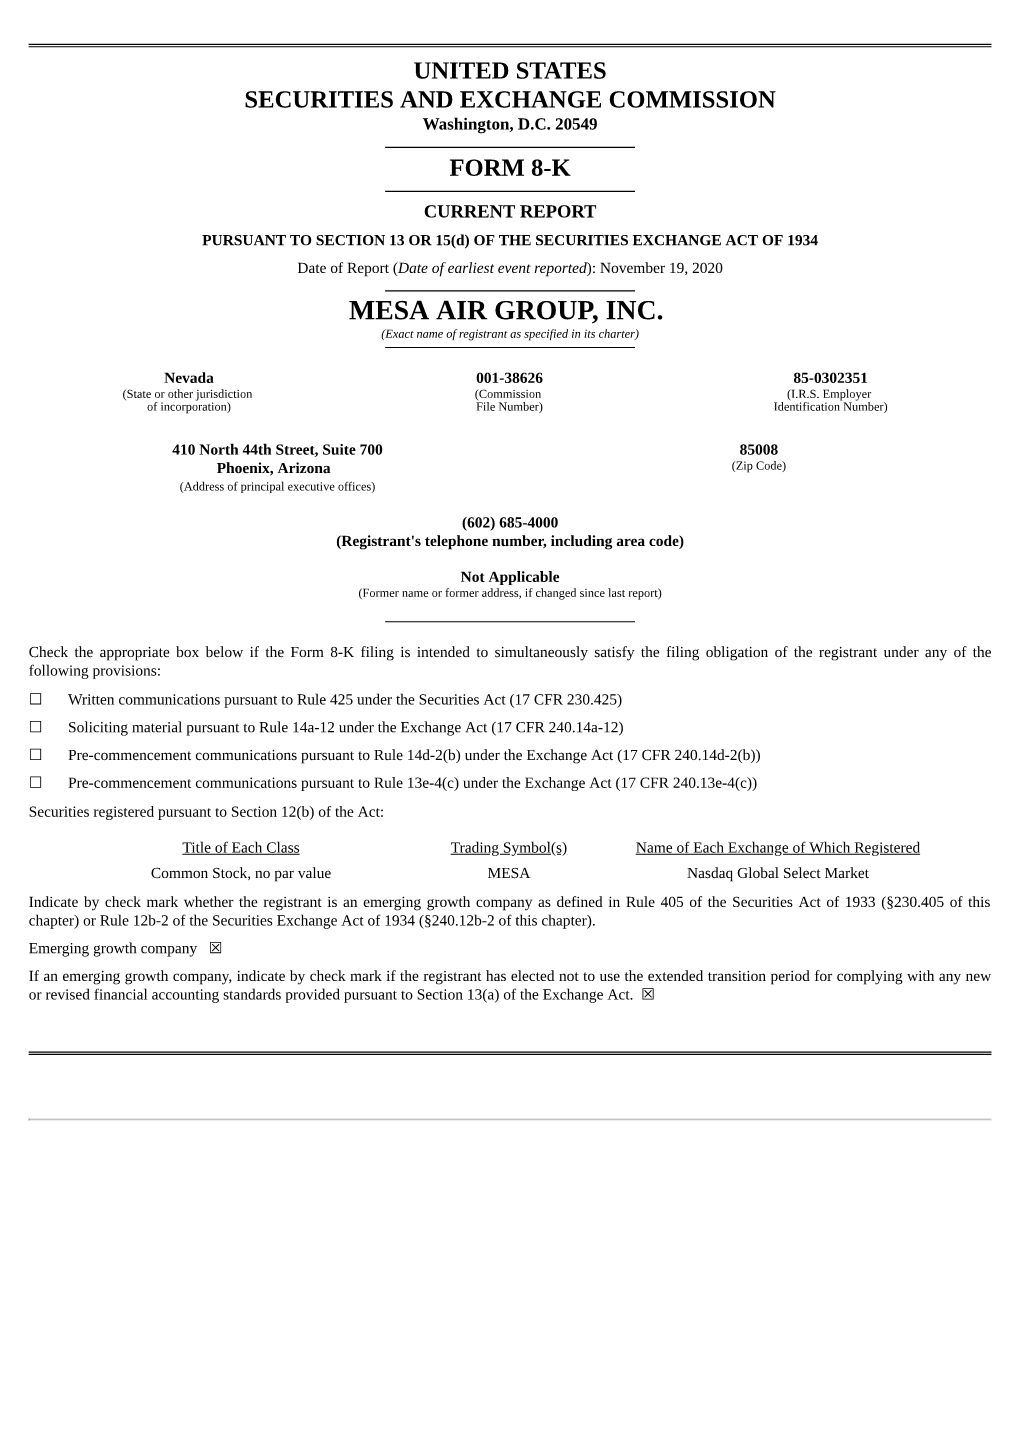 MESA AIR GROUP, INC. (Exact Name of Registrant As Specified in Its Charter)